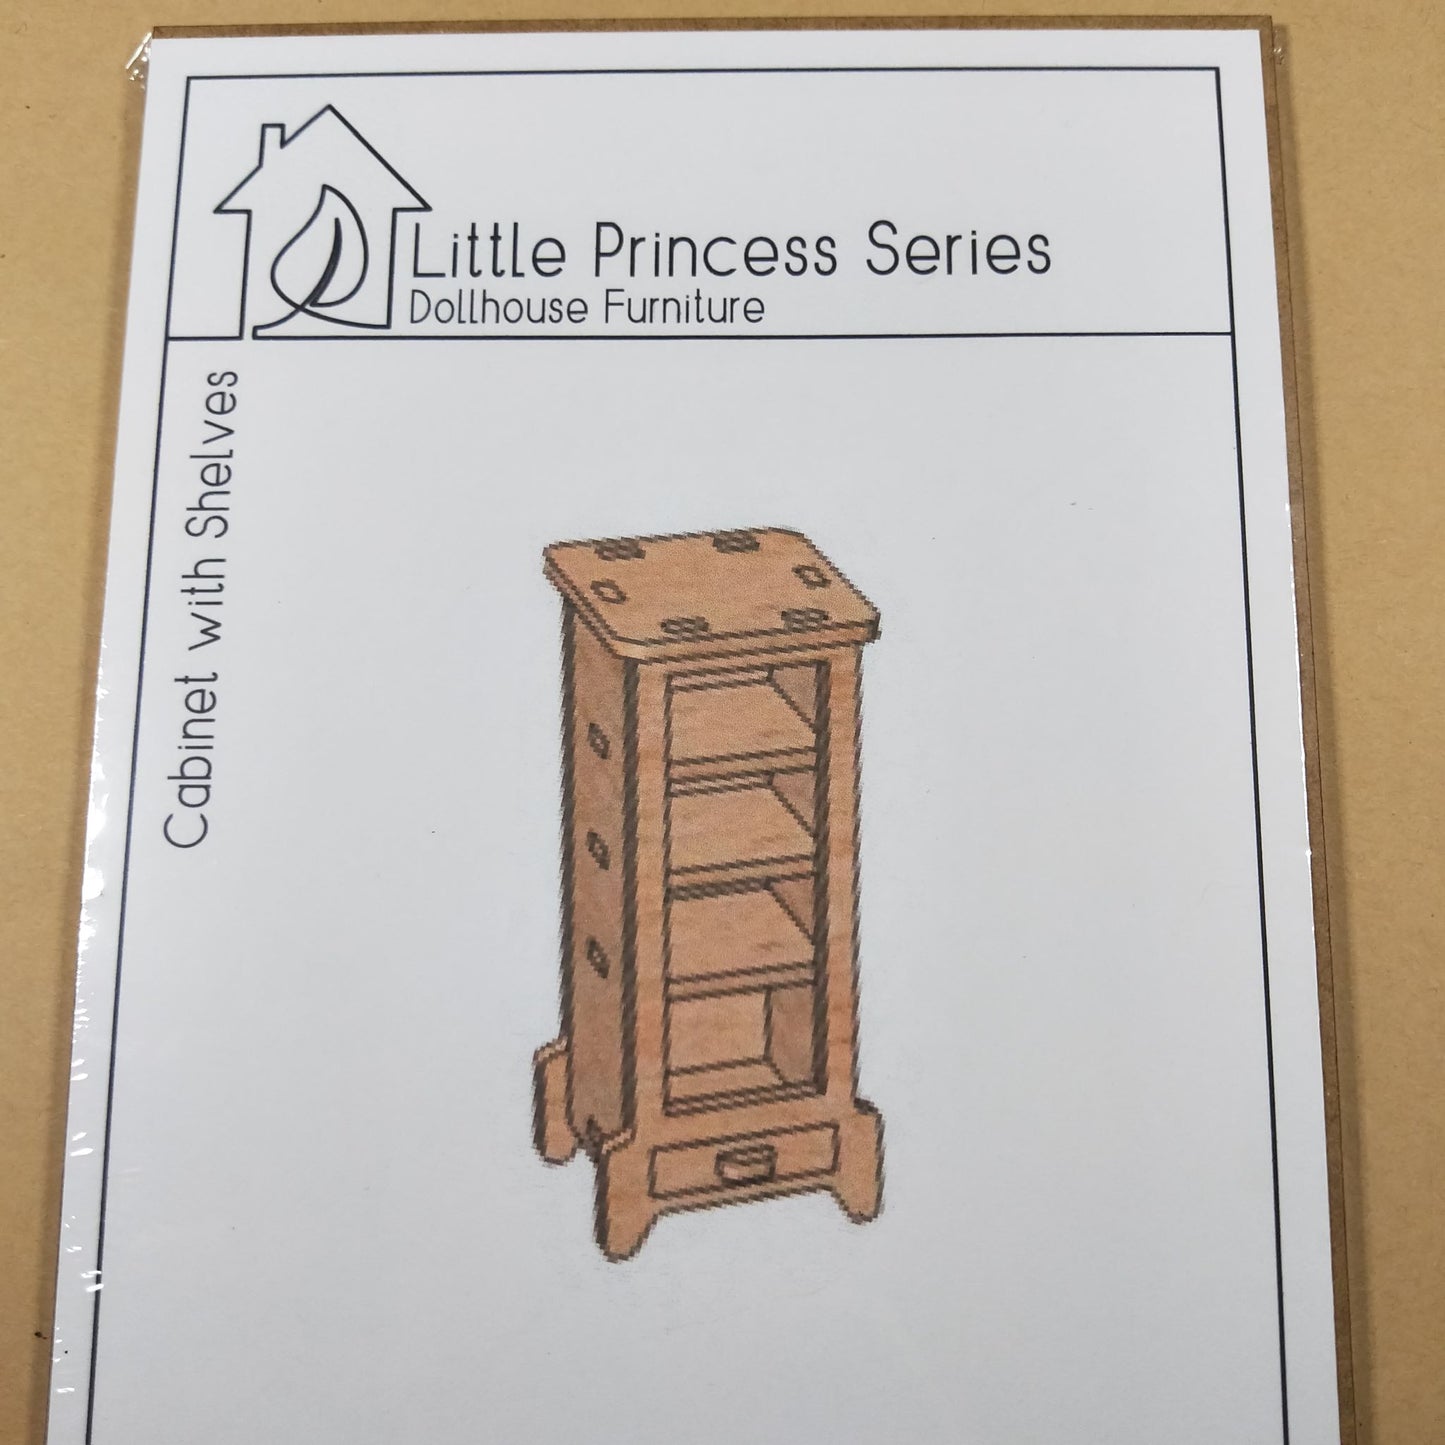 DIY Wooden Dollhouse Furniture Kit - Cabinet with Shelves - Little Princess Series